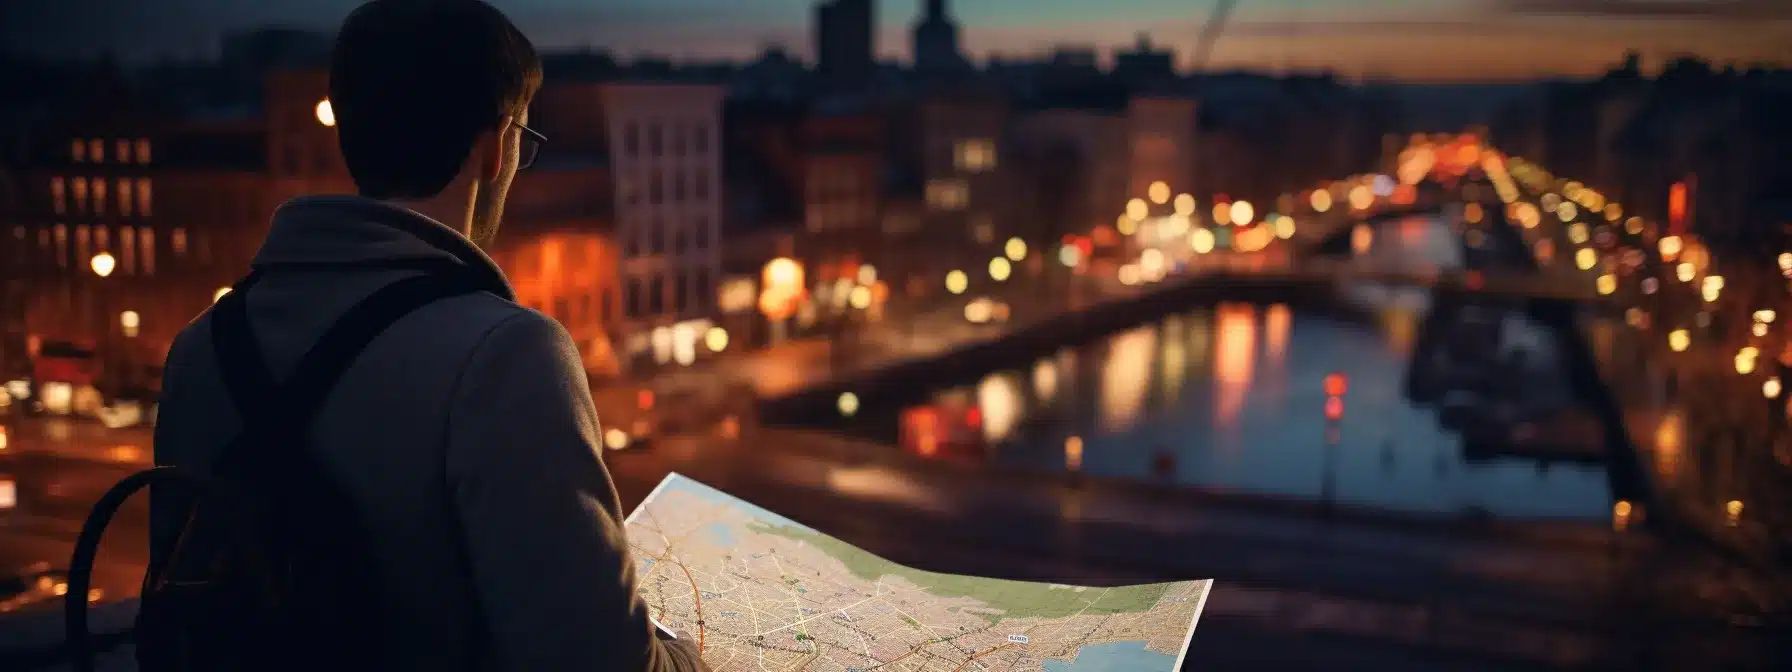 A Person Looking At A City Map, Planning Their Route.